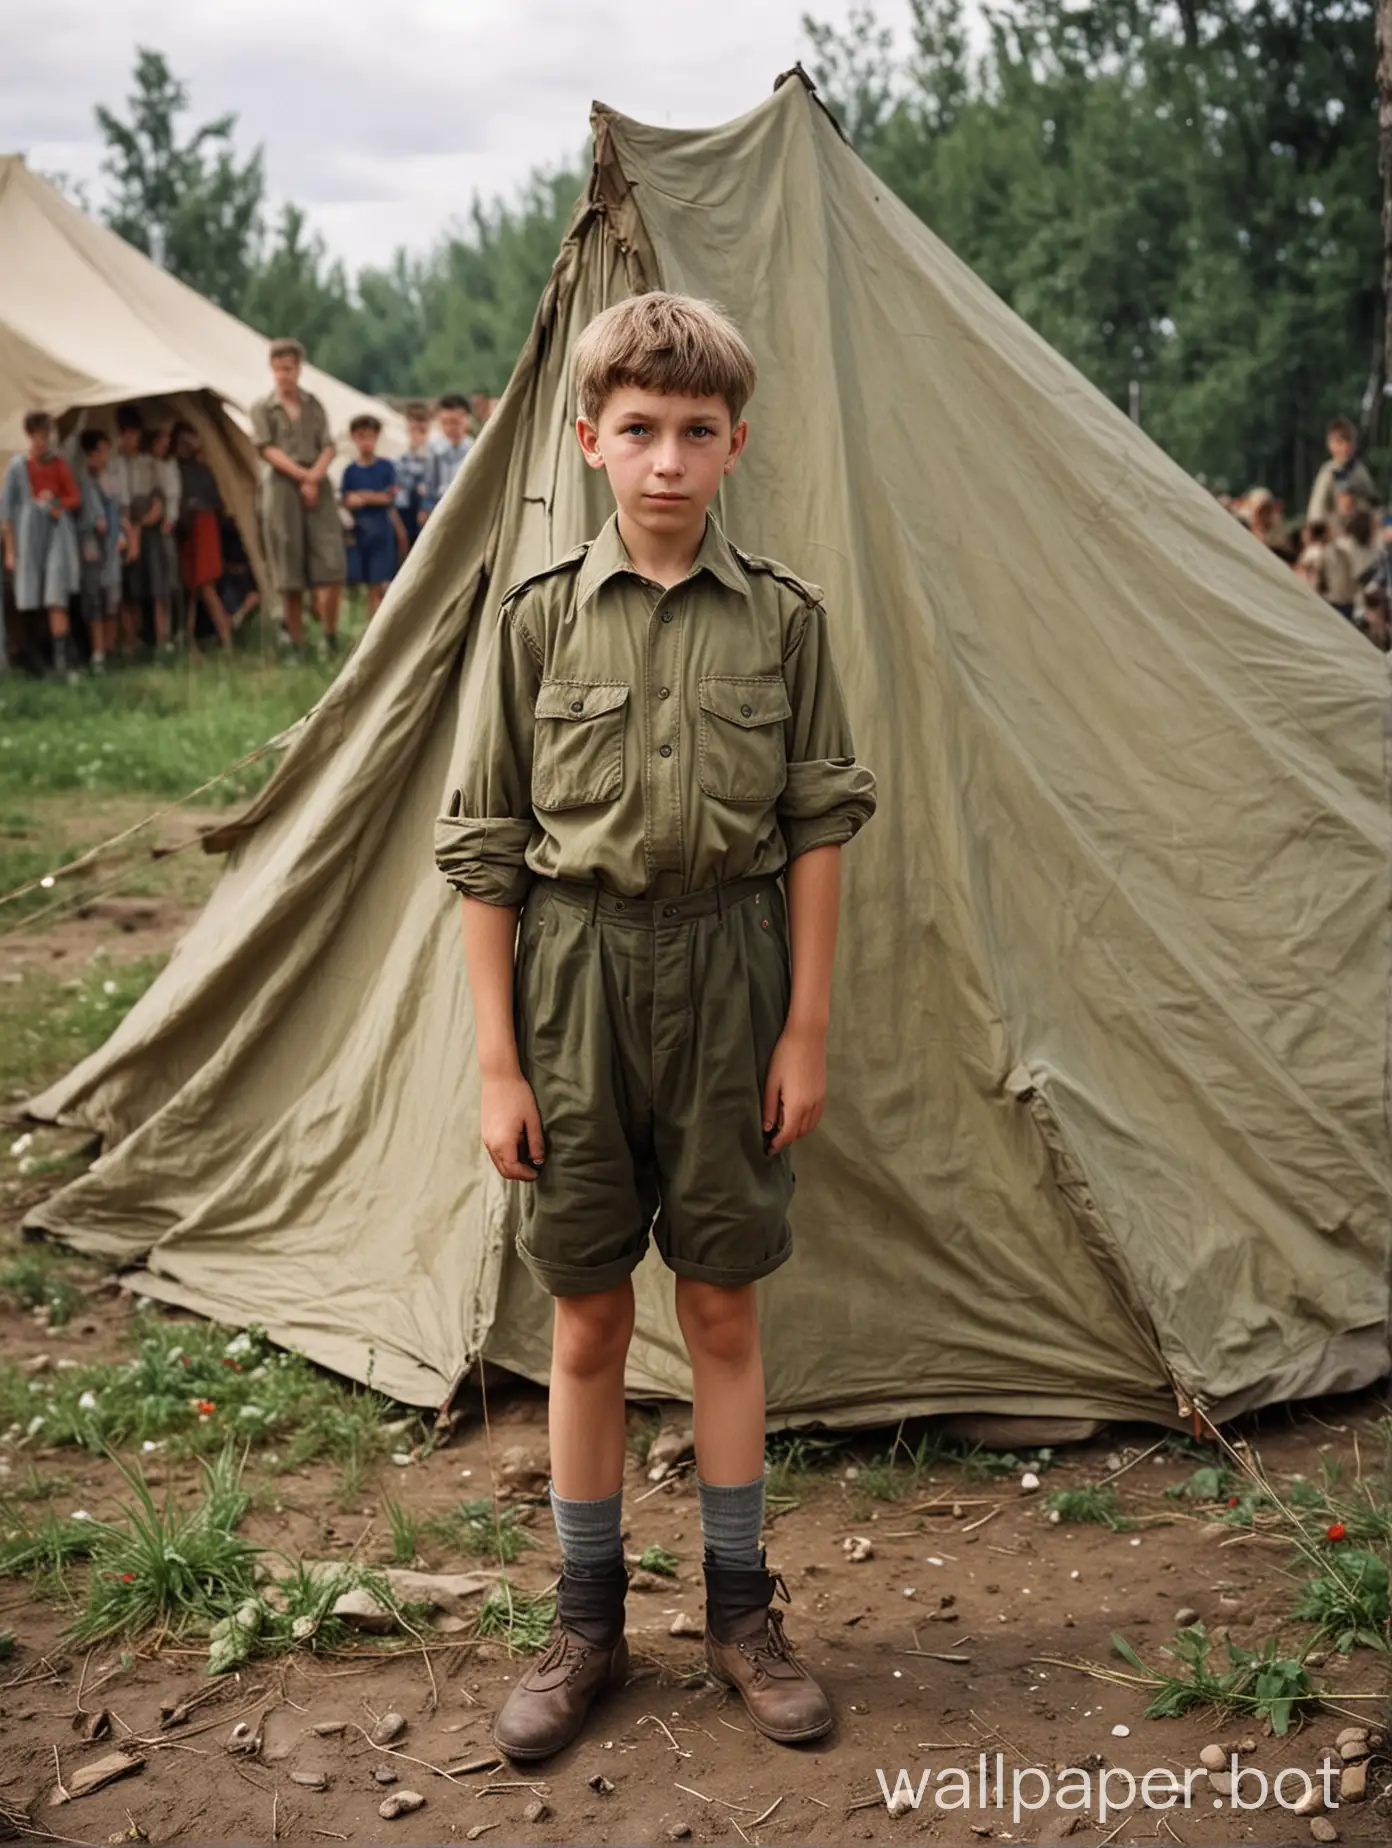 Soviet pioneer boy 13 years old, tent, full-length, people in the background, shorts